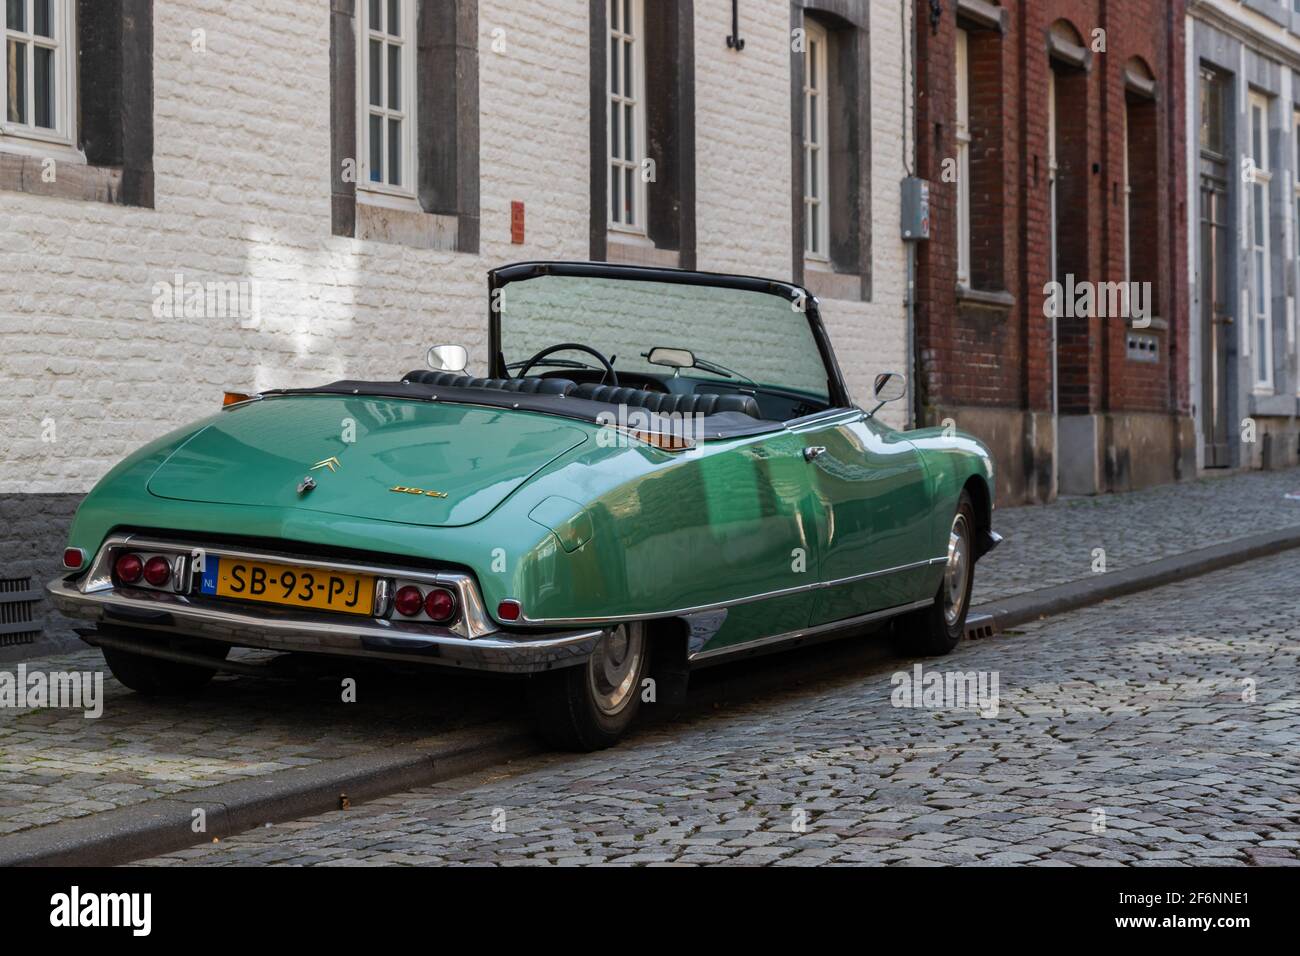 classical Citroën DS 21 car parked in the historical city centre of Maastricht. The car fits to the ancient environment and matches with cobblestones Stock Photo